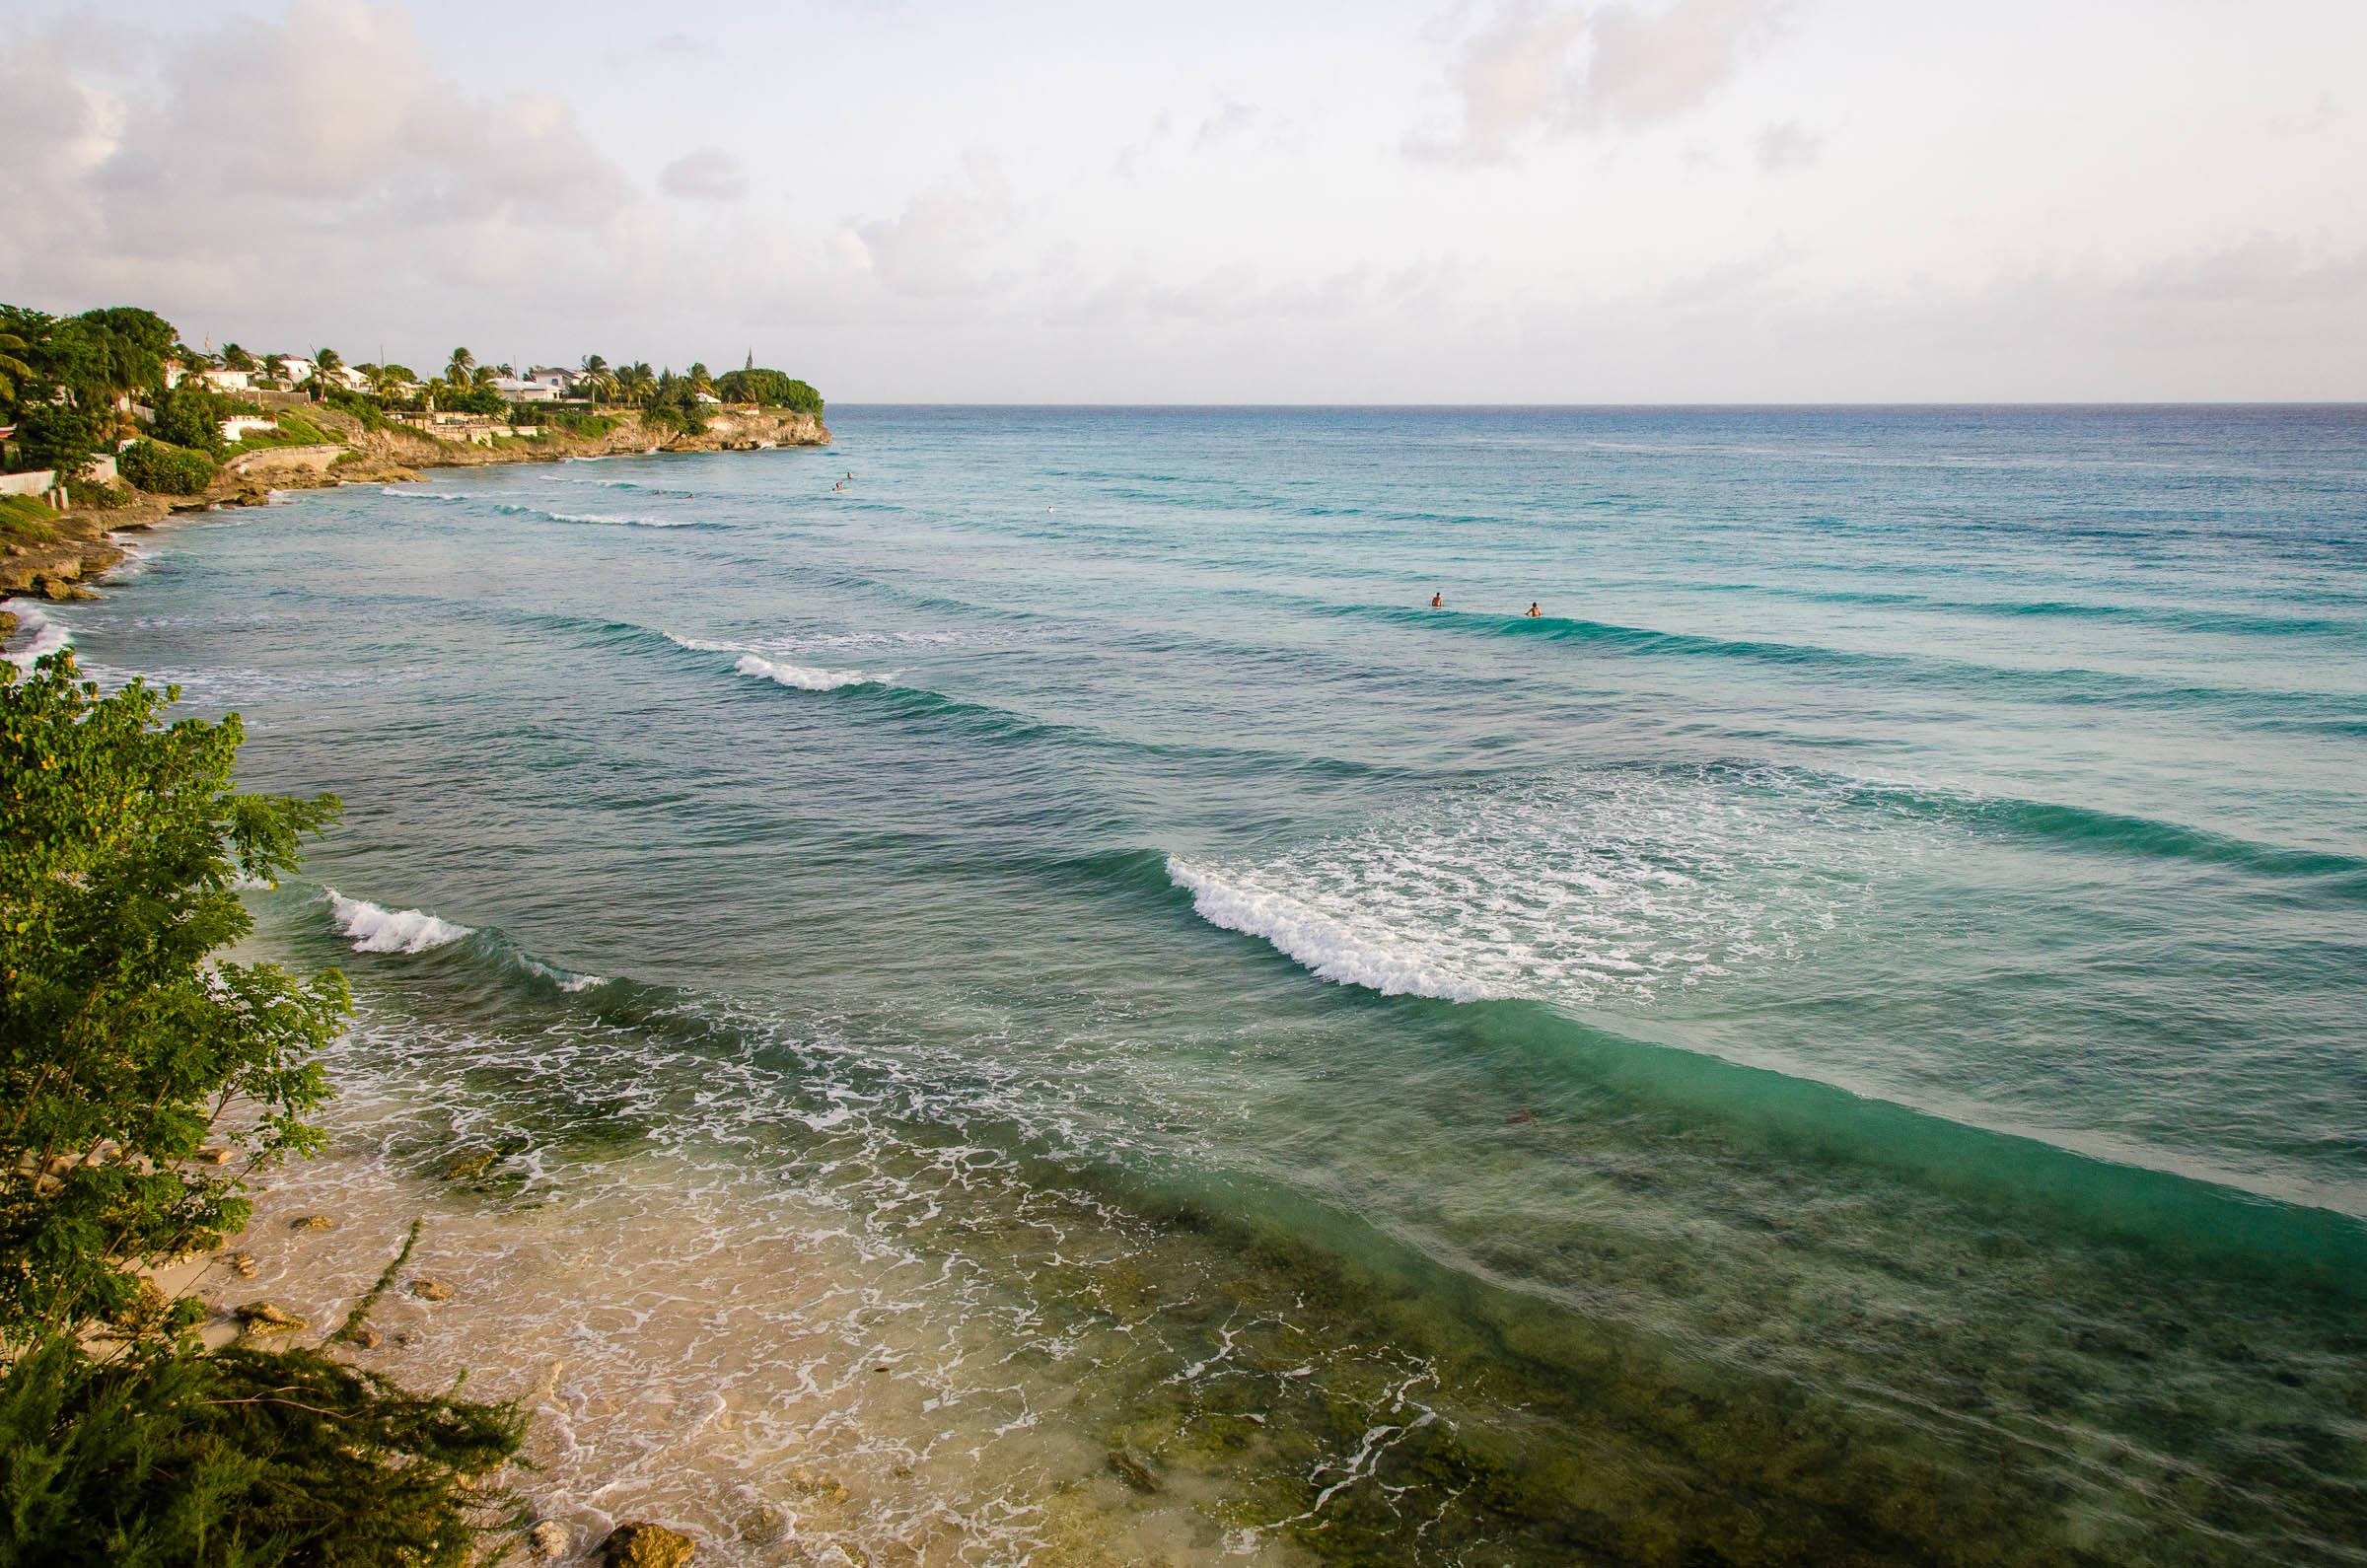 Freight's Bay, Barbados by Patrick Bennett